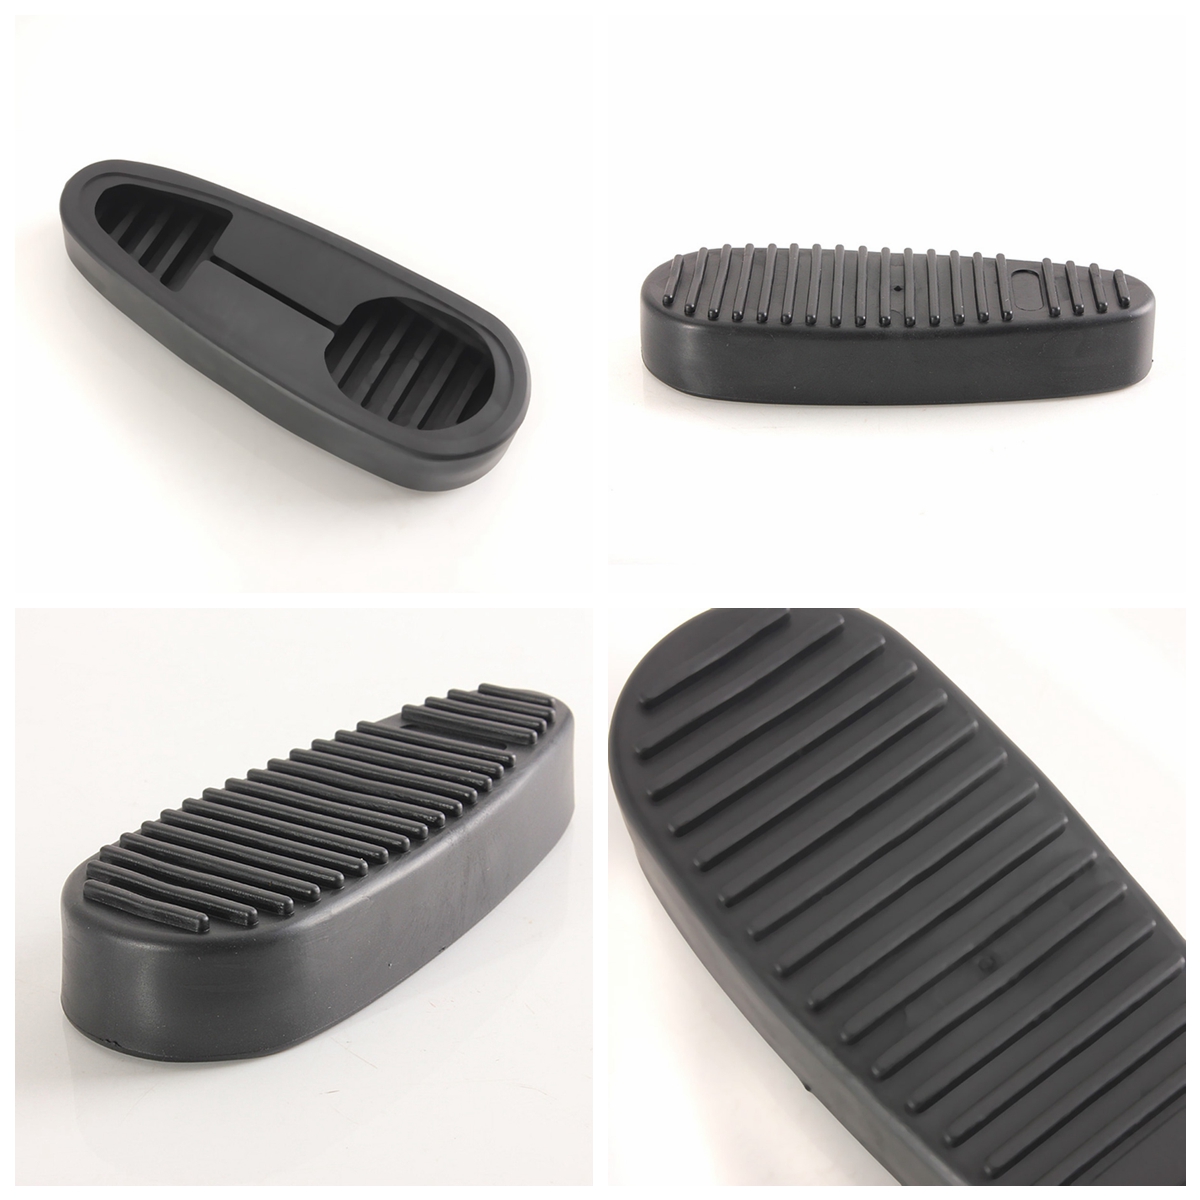 Ribbed Stealth Slip On Rubber Combat Buttpad Butt Pad For 6 Position